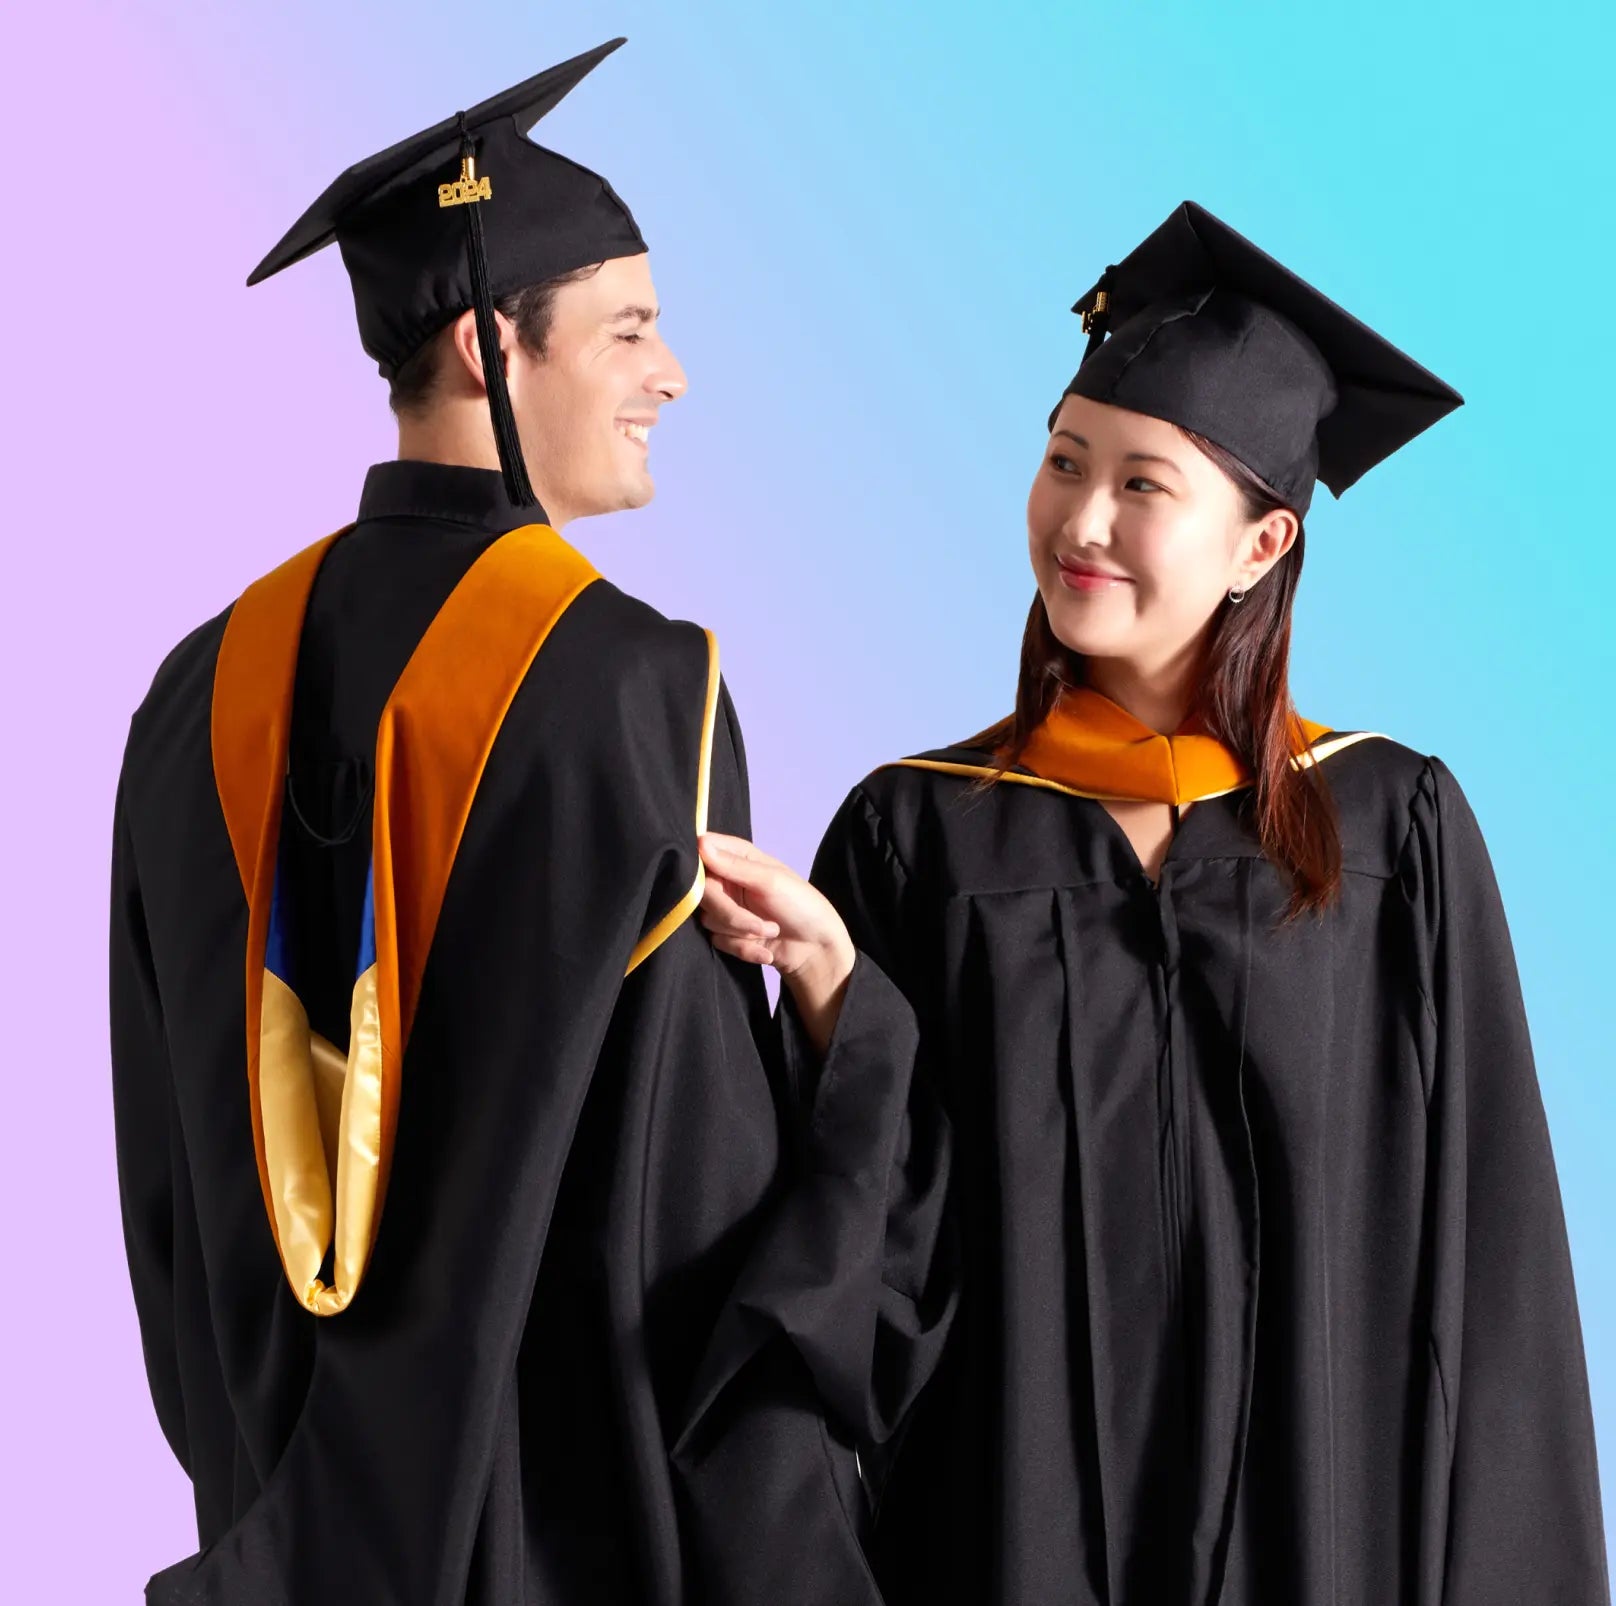 Male and female Master's graduates wearing masters regalia with hoods on graduation day